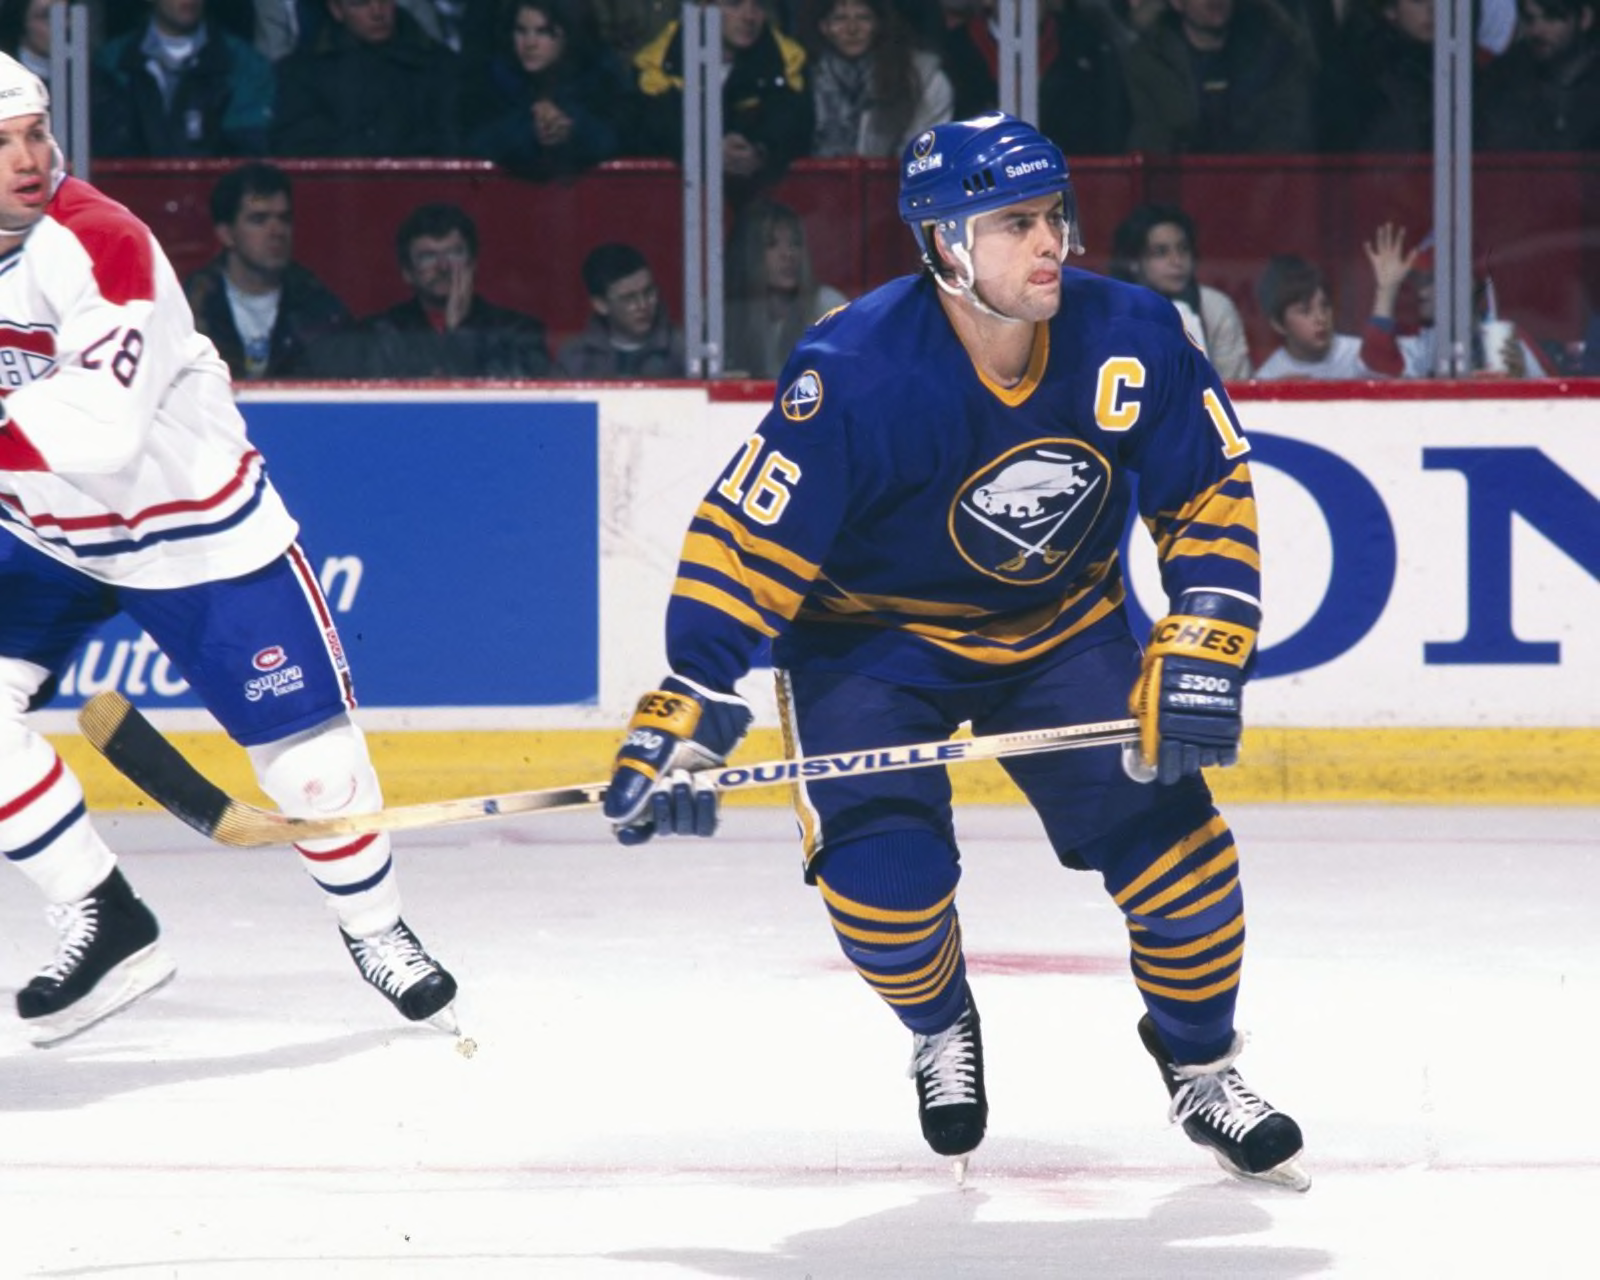 Buffalo Sabres on X: The story of Alexander Mogilny and the Sabres  beganunusually 😯 But after an incredible career in the @NHL, he could  finally be elected to the @HockeyHallFame today